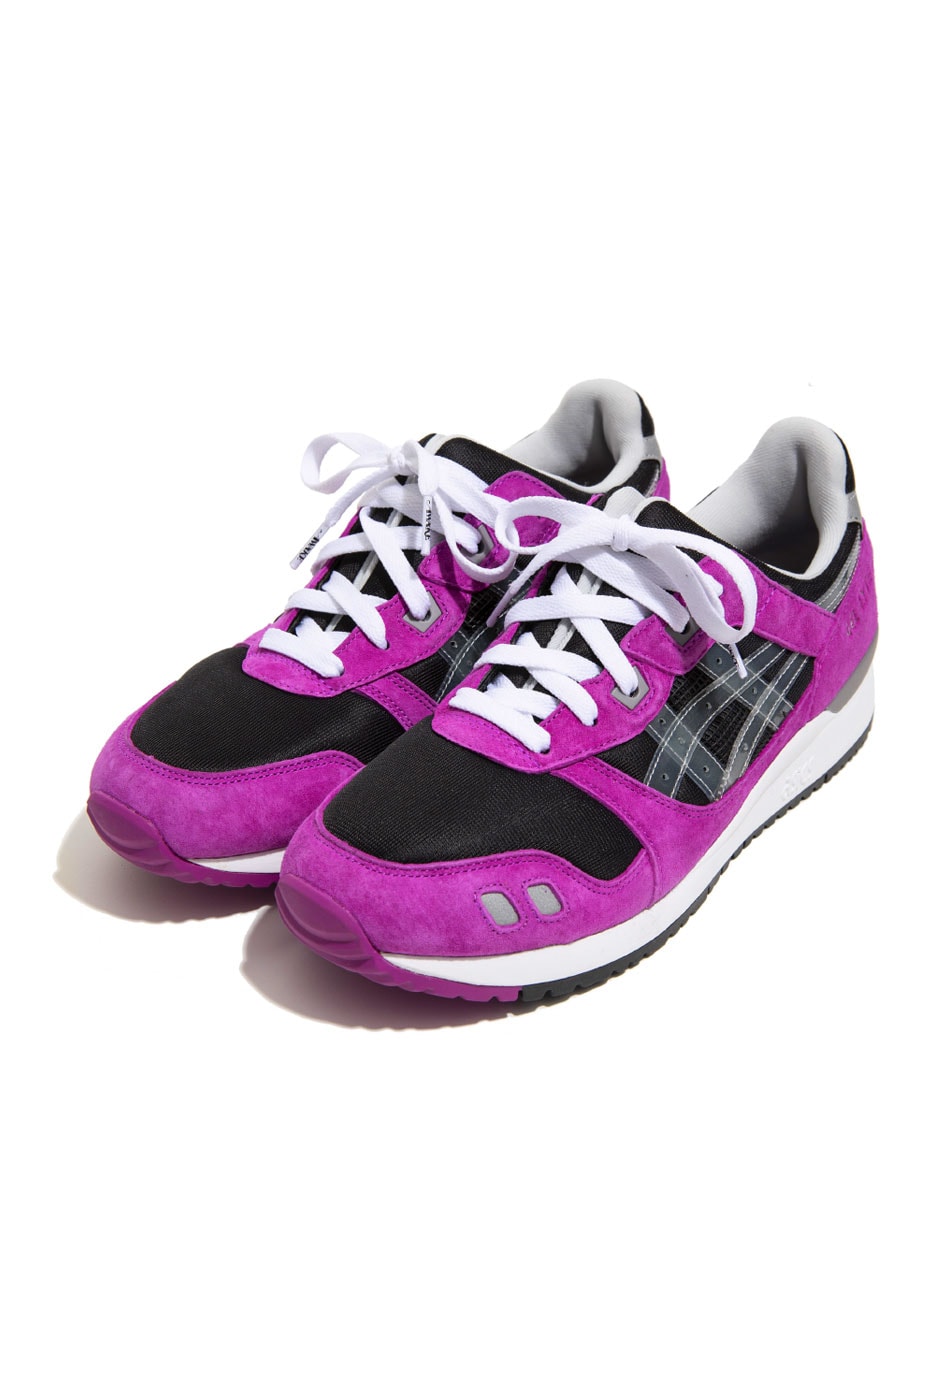 Awake NY ASICS GEL LYTE III running shoe early 90s Closer Look sound mind sound body purple black silver white green elephant blue yellow release info date price